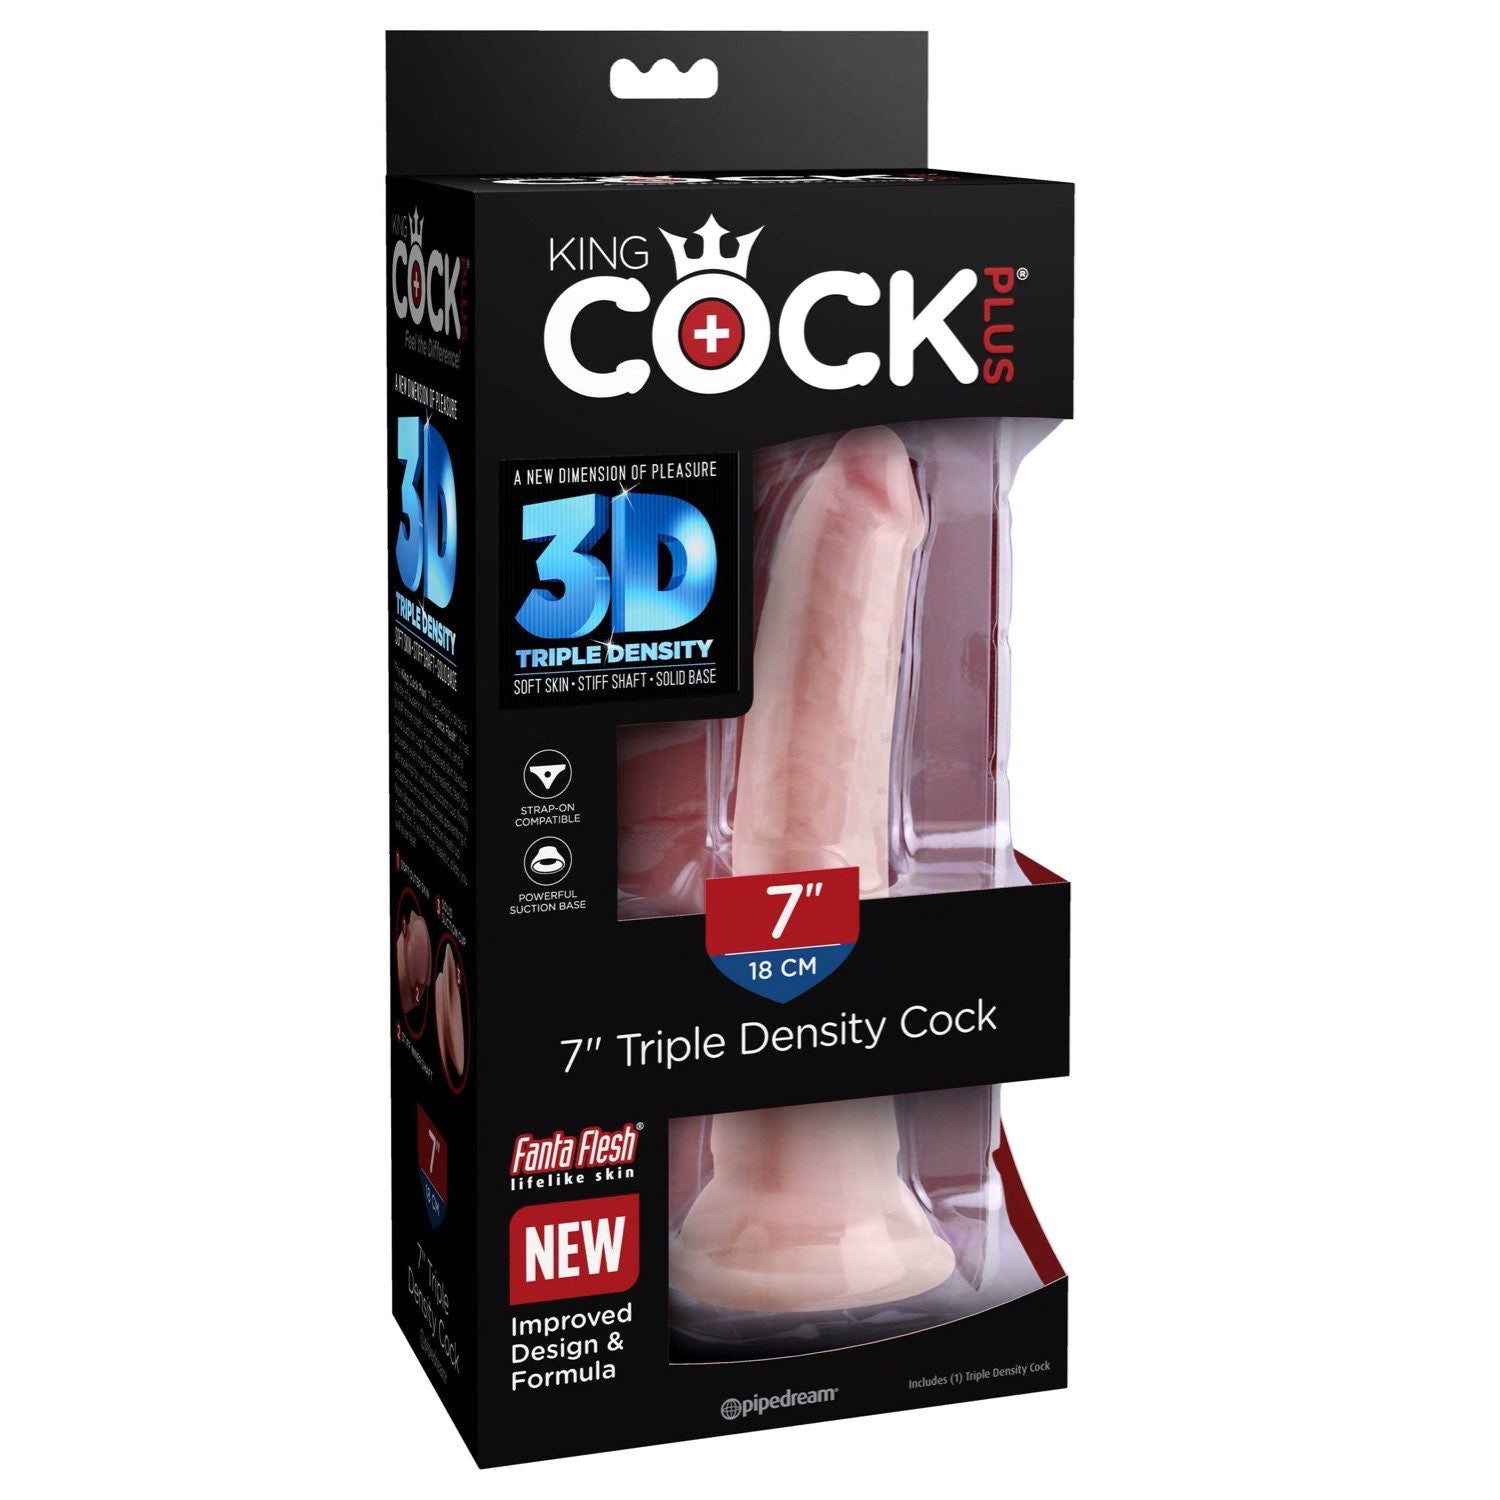 King Cock Plus 7&quot; Triple Density Cock - Flesh 17.8 cm Dong by Pipedream